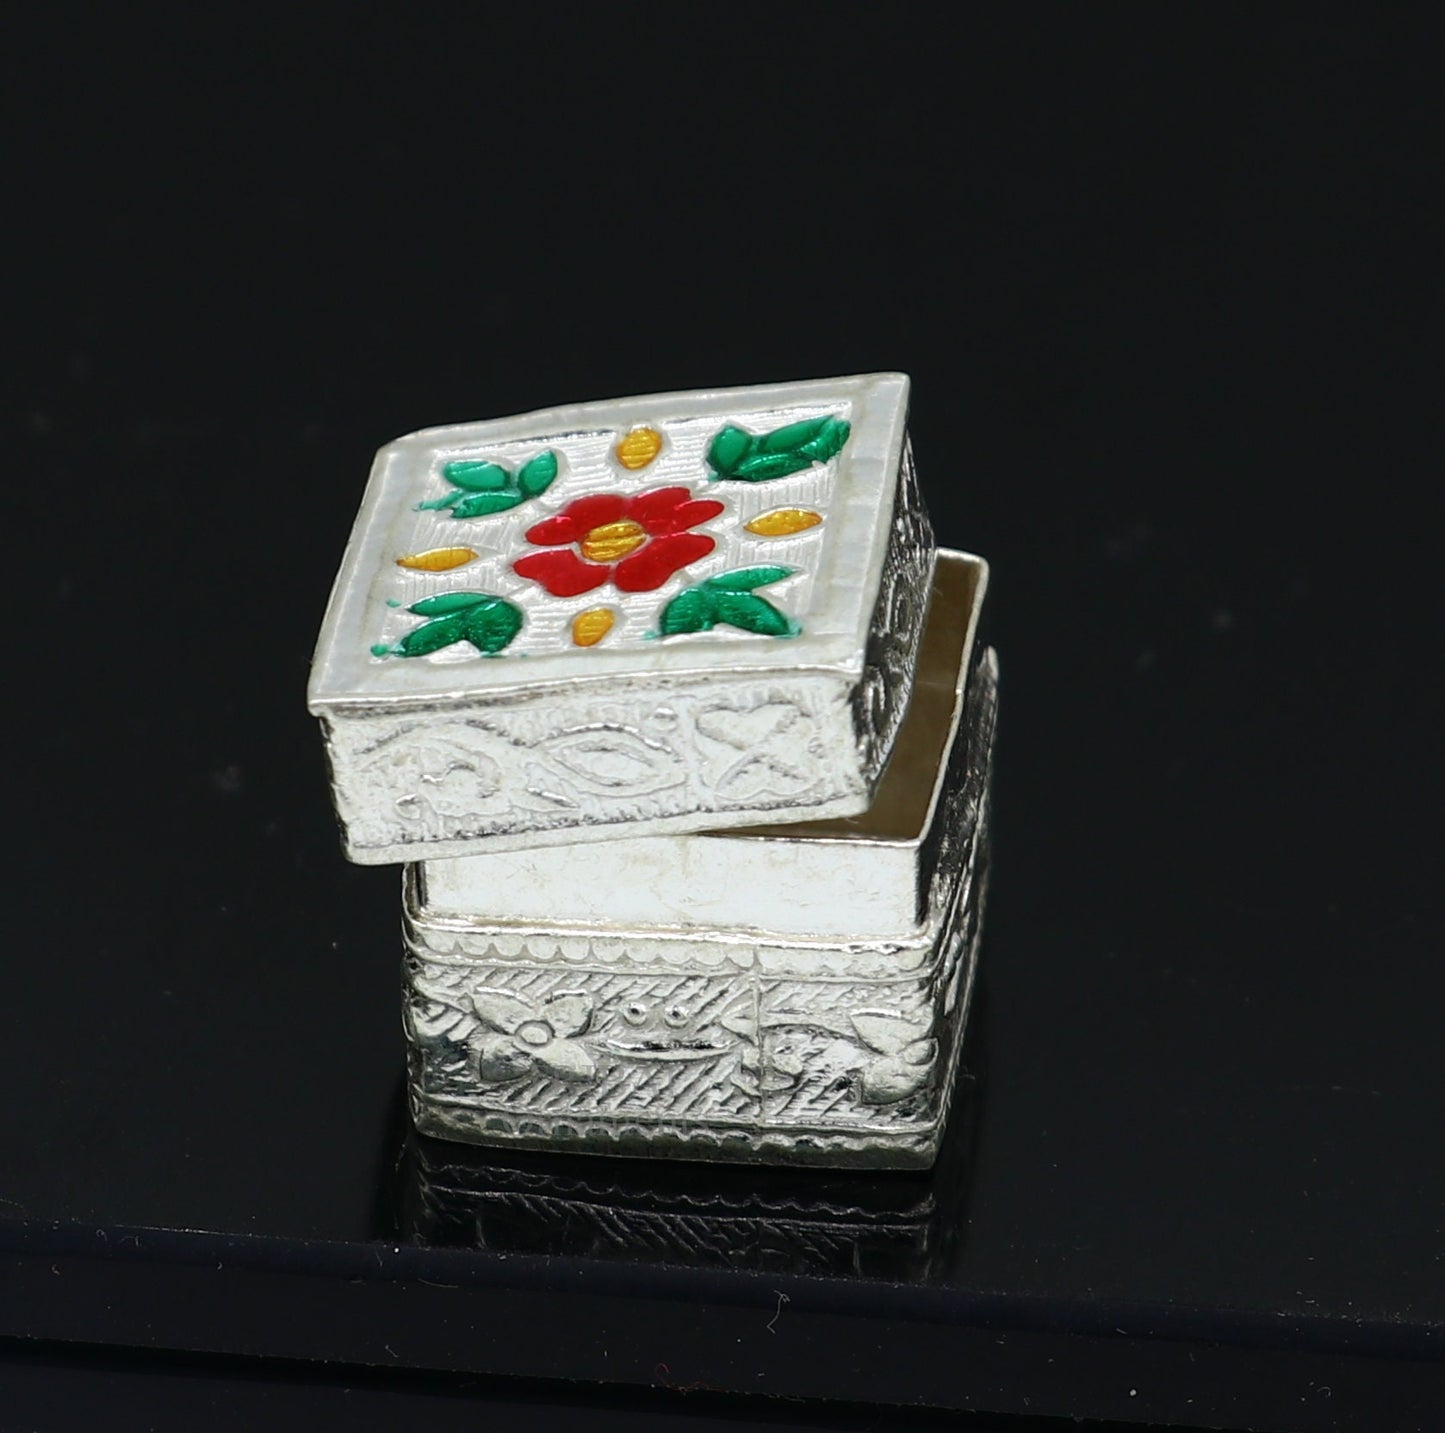 Vintage style 925 sterling silver handmade gorgeous square shape small trinket kajal box, casket box, container box, silver article stb359 - TRIBAL ORNAMENTS